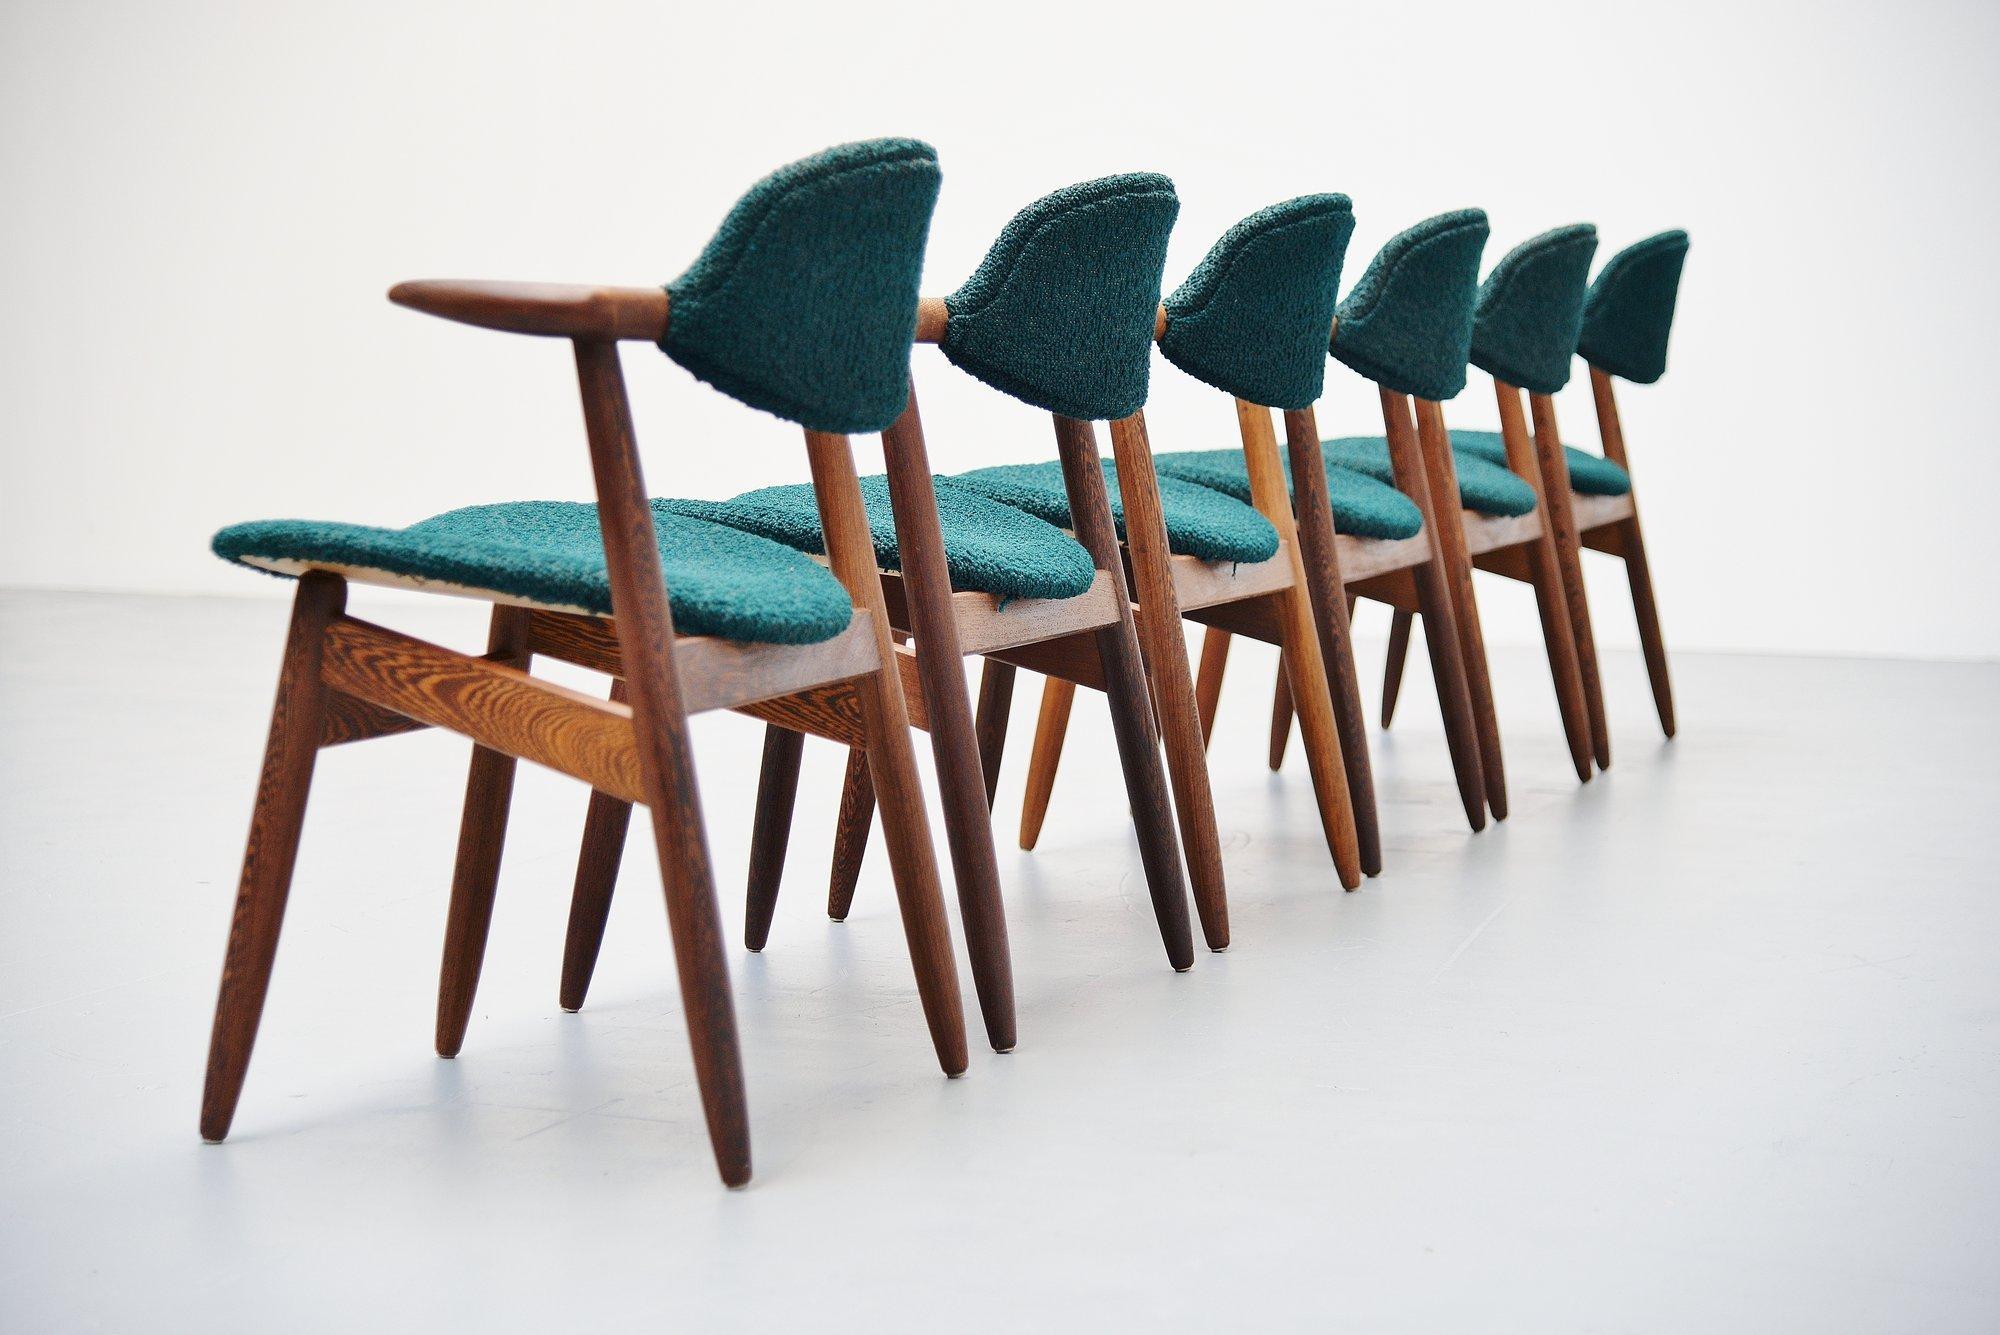 This is for a set of one of our favorite Dutch modern chairs, designed by Tijsseling from the Propos series, manufactured by Hulmefa, Holland 1960. Made of solid wenge wood, and original fluffy deep green original bouclé upholstery that is now